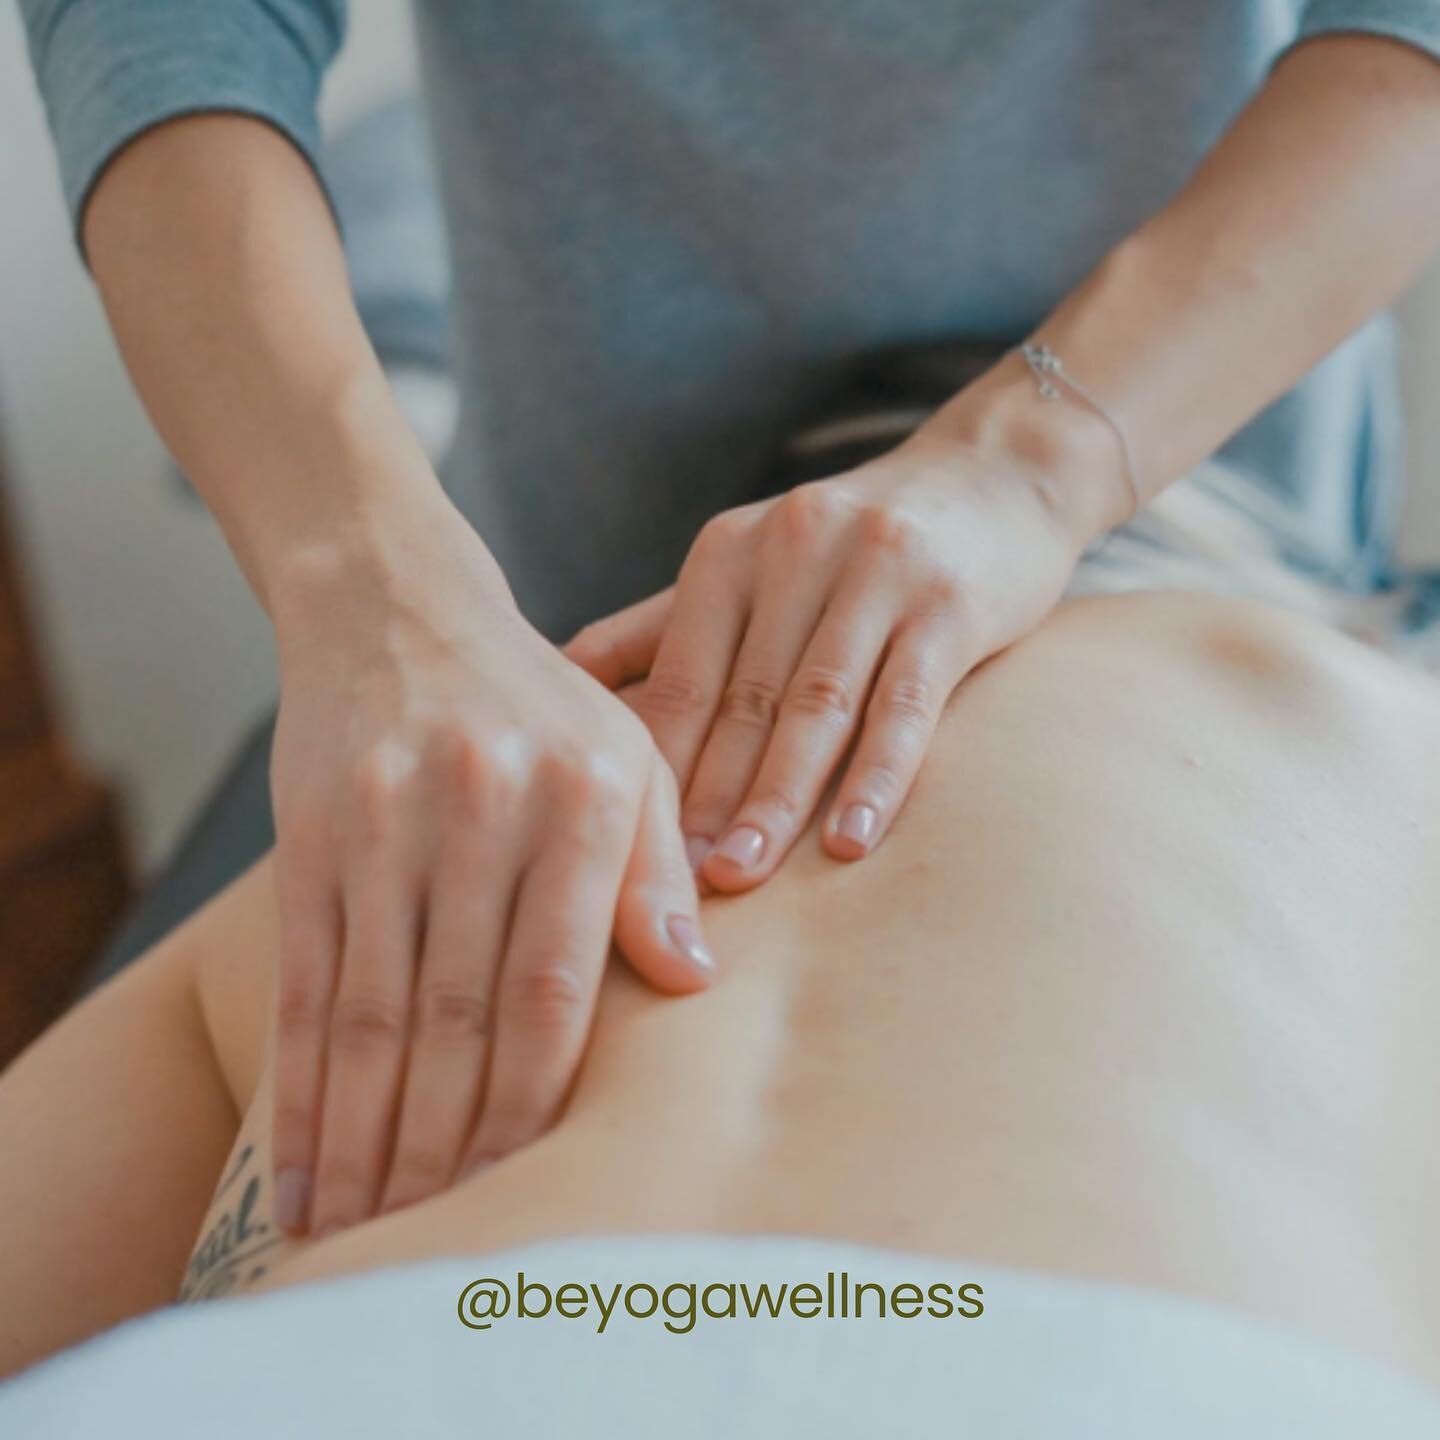 Take your body to a whole new level; book a massage with our Registered Massage Therapist, Elena Guileva! 💫

This wellness service focuses on reducing and relieving acute or chronic pain in the body, using a variety of techniques to promote healing 